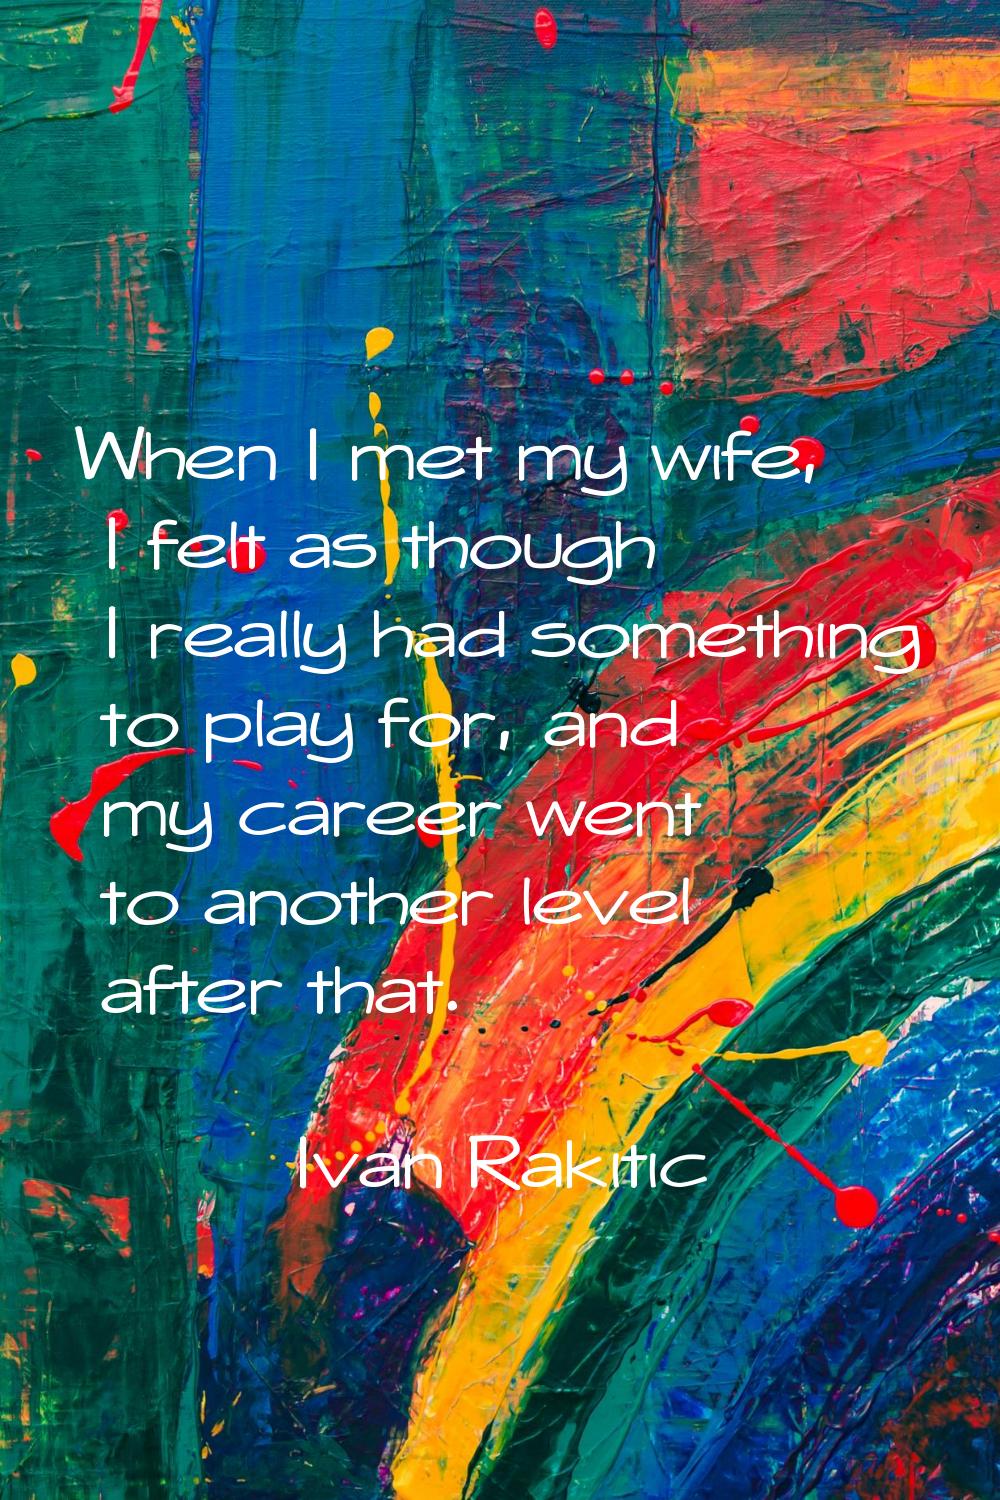 When I met my wife, I felt as though I really had something to play for, and my career went to anot